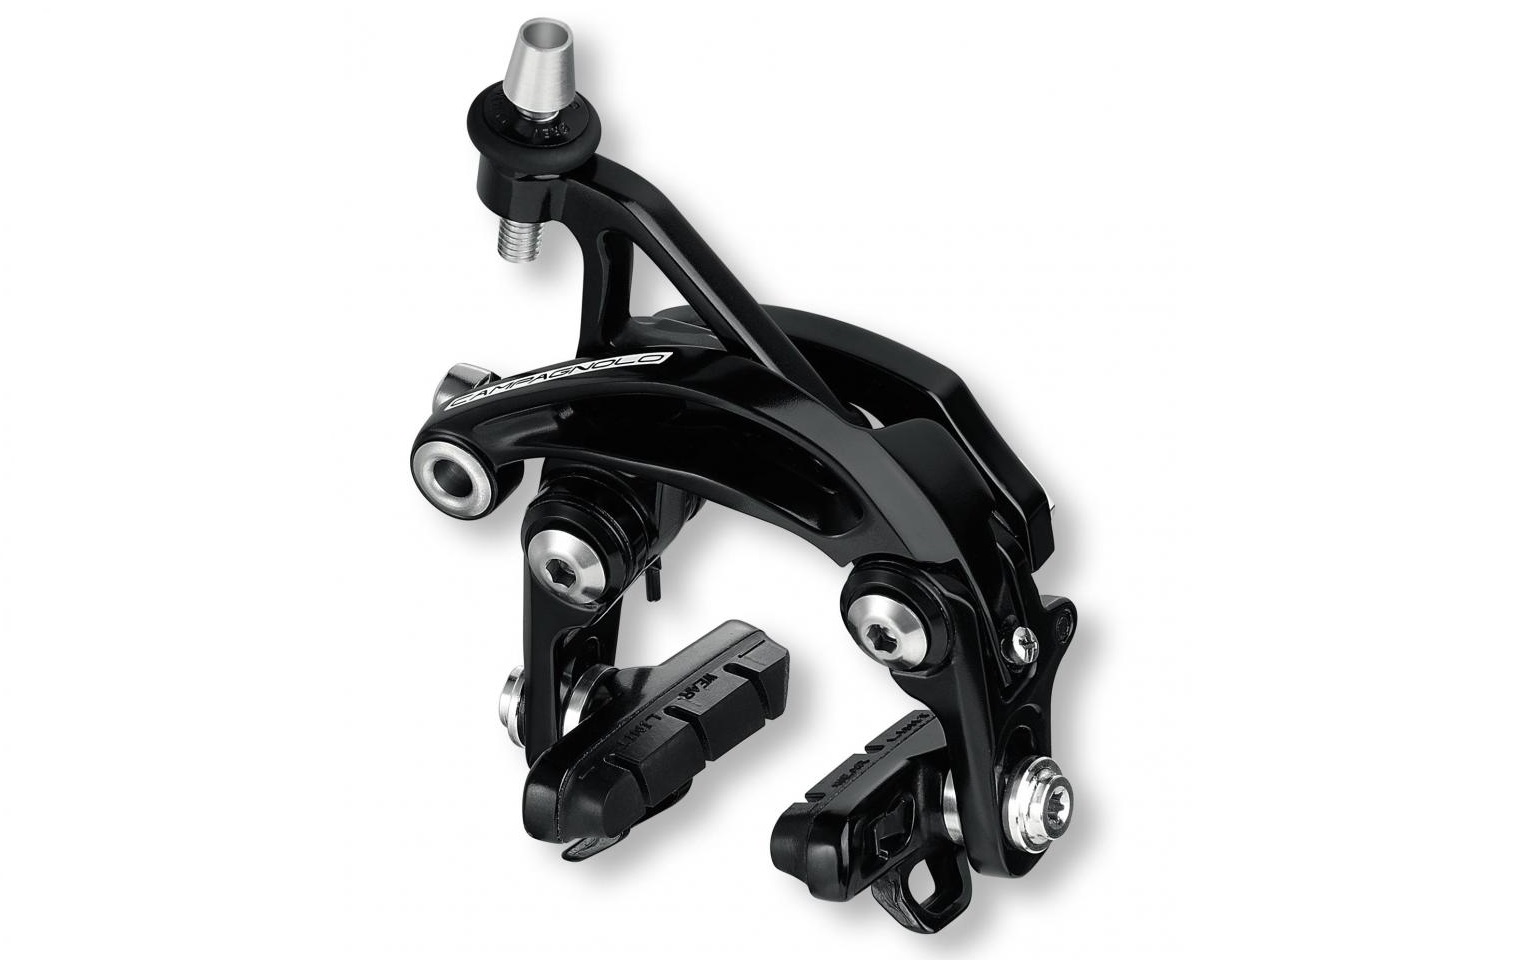 Campagnolo Direct Mount brake front